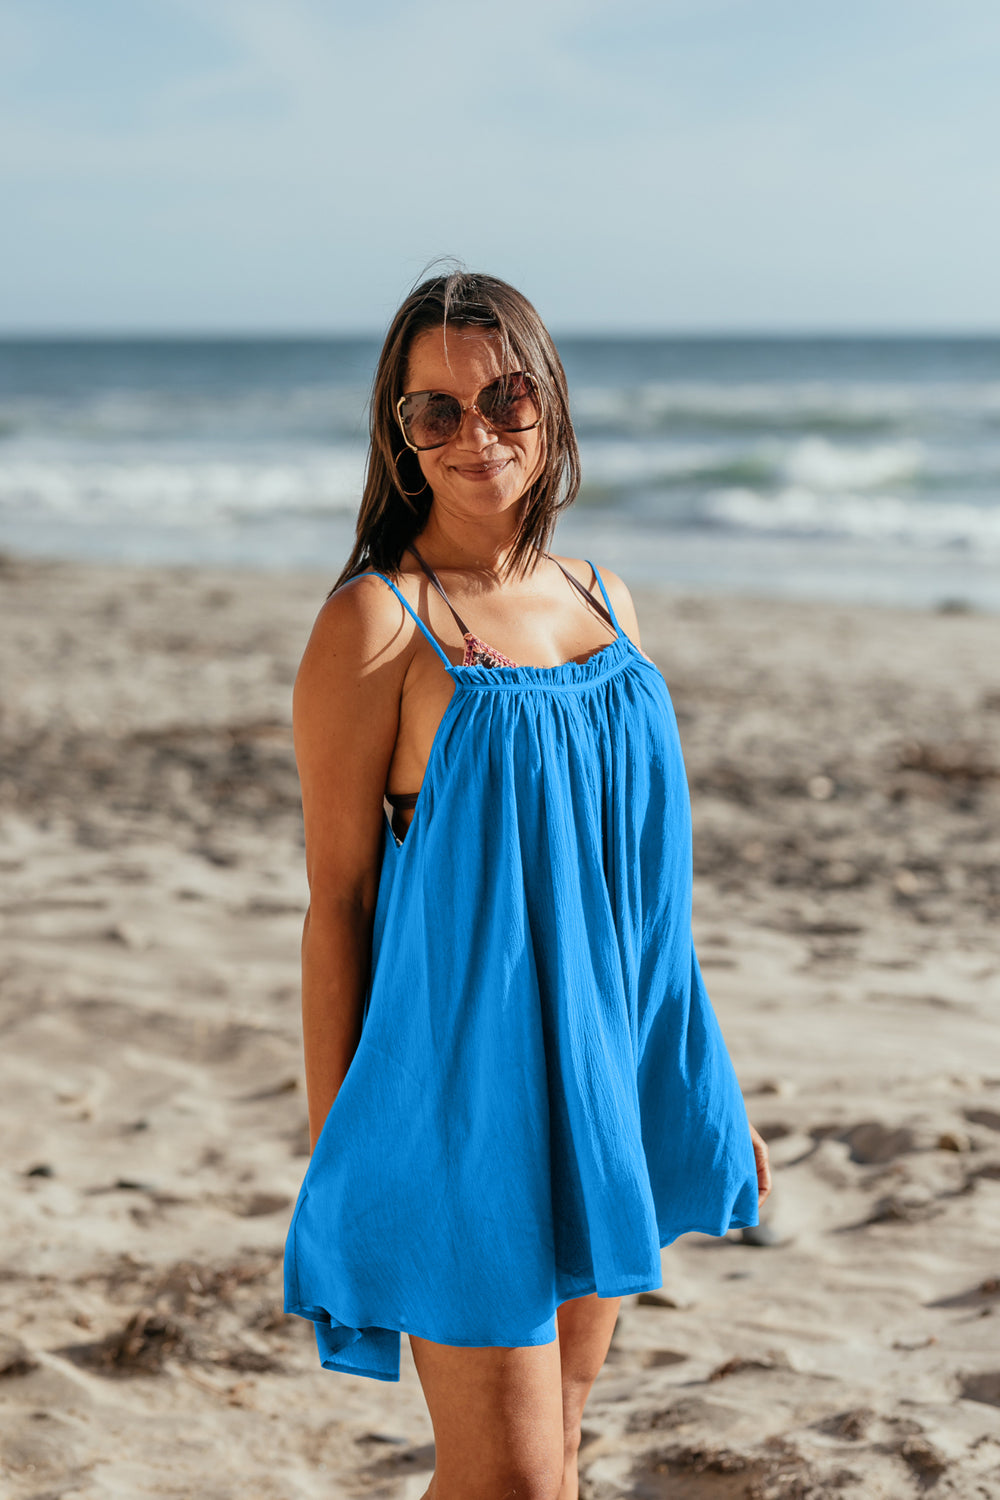 Woman at the beach smiling, wearing Bette Amalie mini cover up in Ocean blue